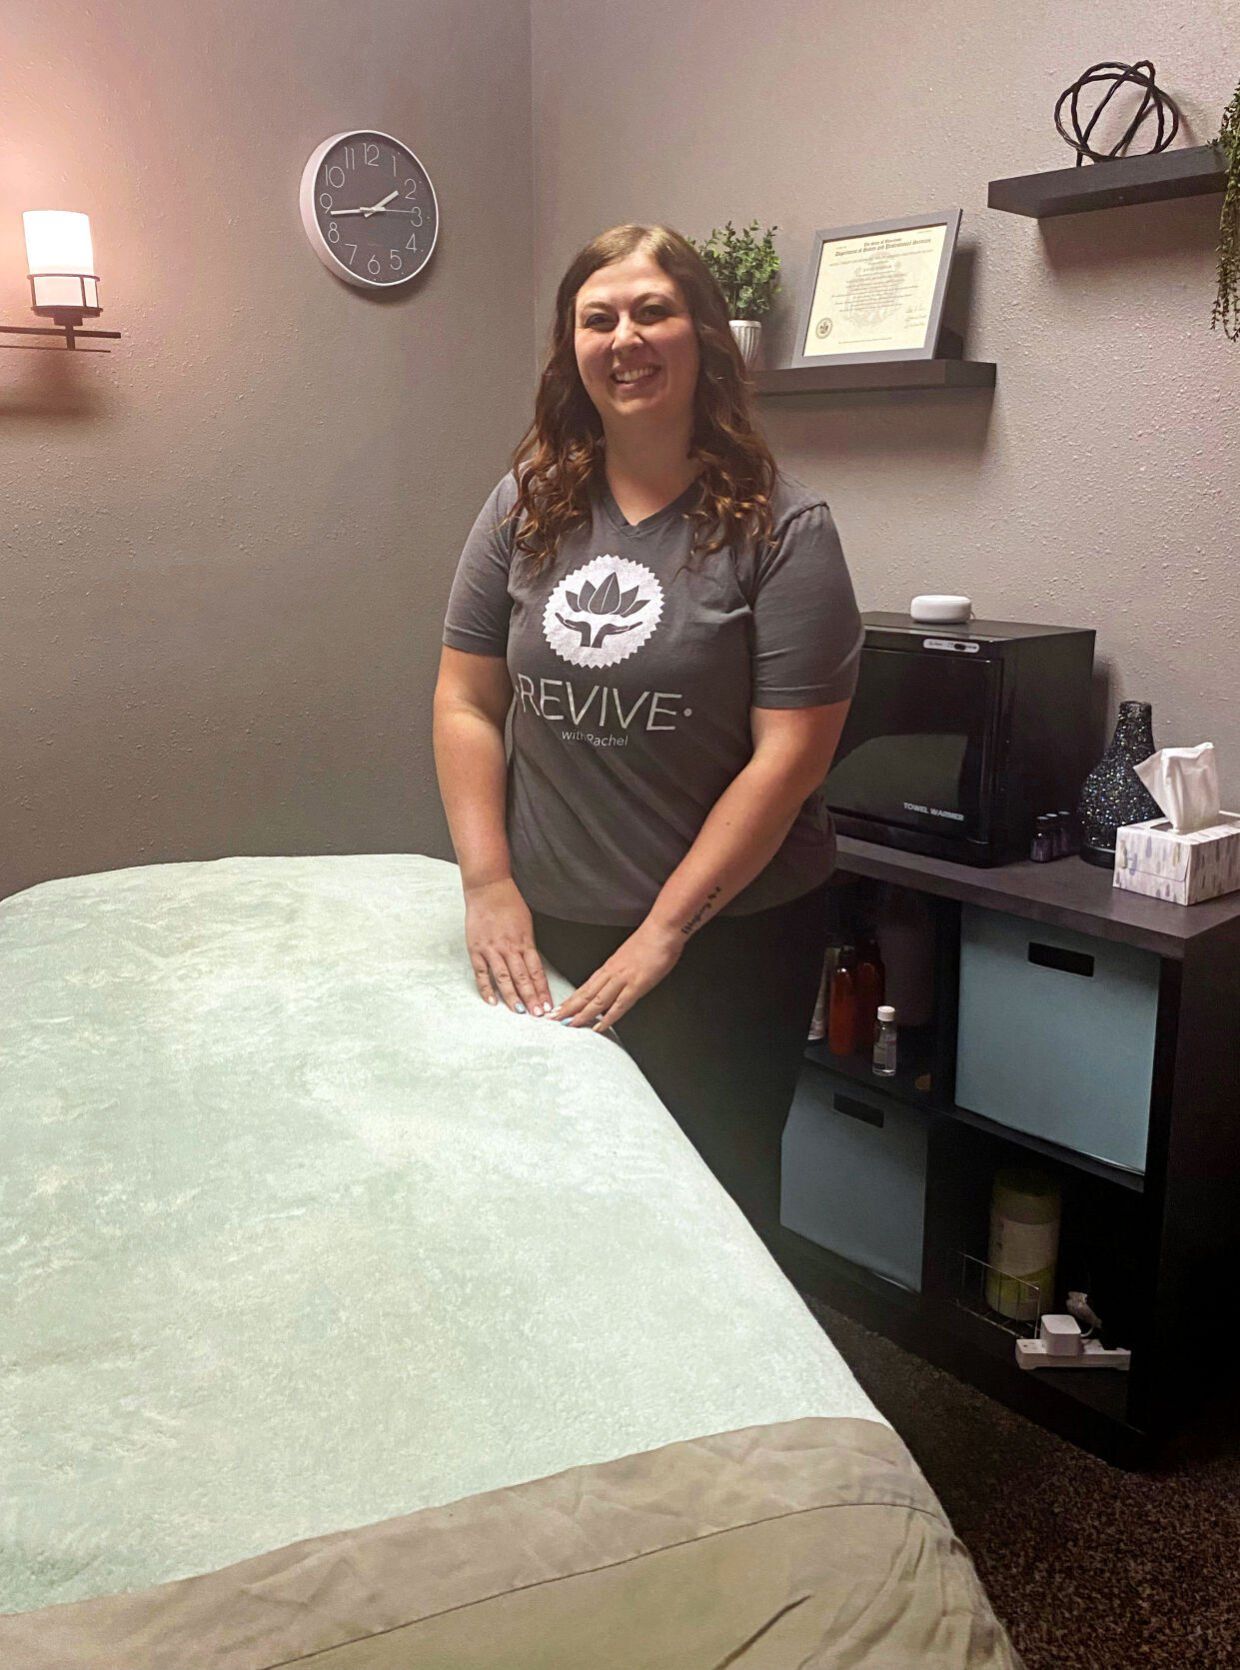 Rachel Mueller, a native of Hazel Green, Wis., started her own massage therapy business, Revive with Rachel. She’s currently working out of a spa on Main Street in Cuba City, but she someday hopes to grow by hiring other massage therapists and having her own location.    PHOTO CREDIT: Contributed